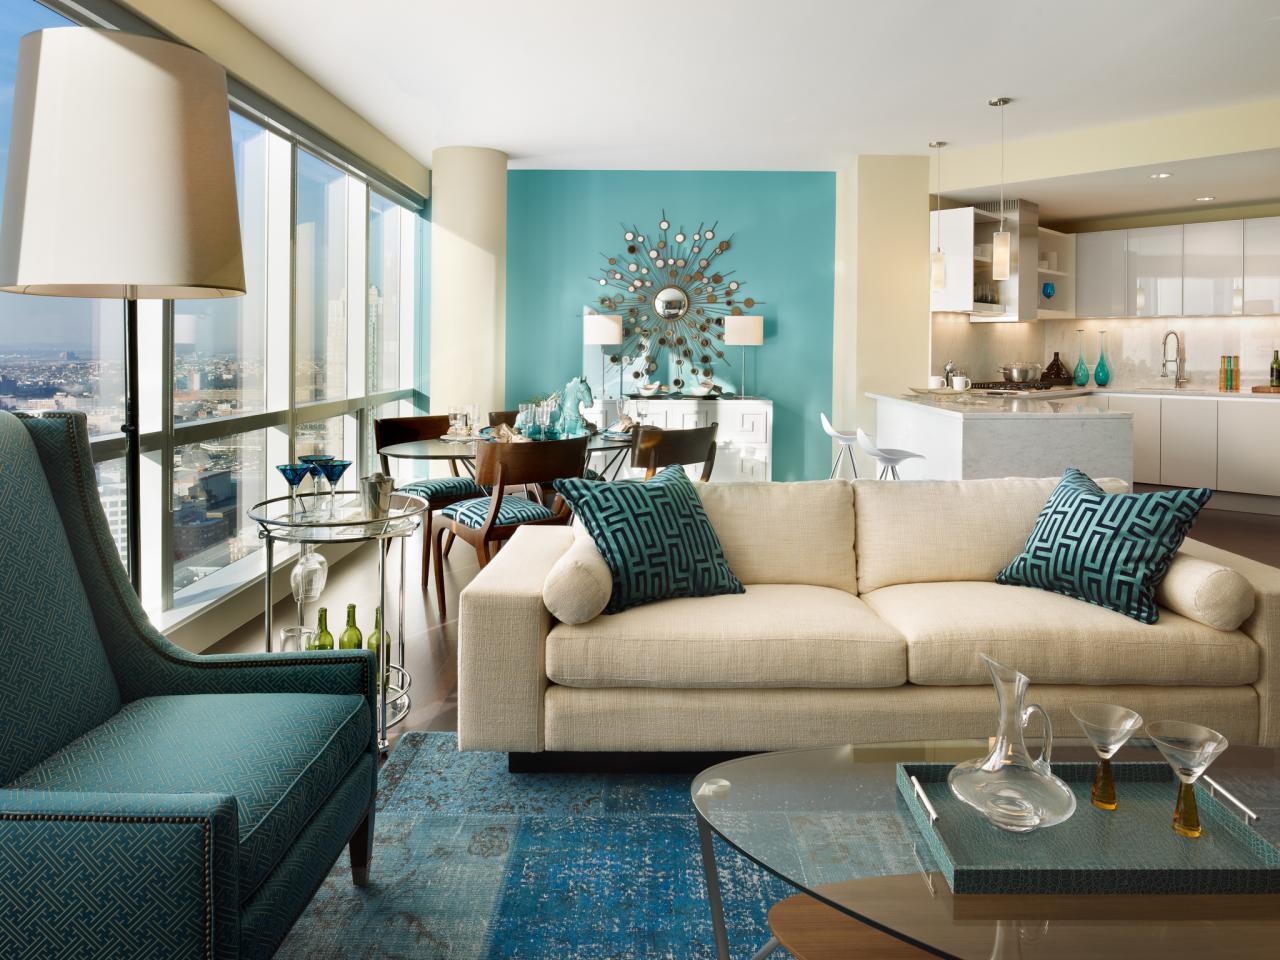 Living Room In Turquoise Colors 49, Living Room Turquoise Accents